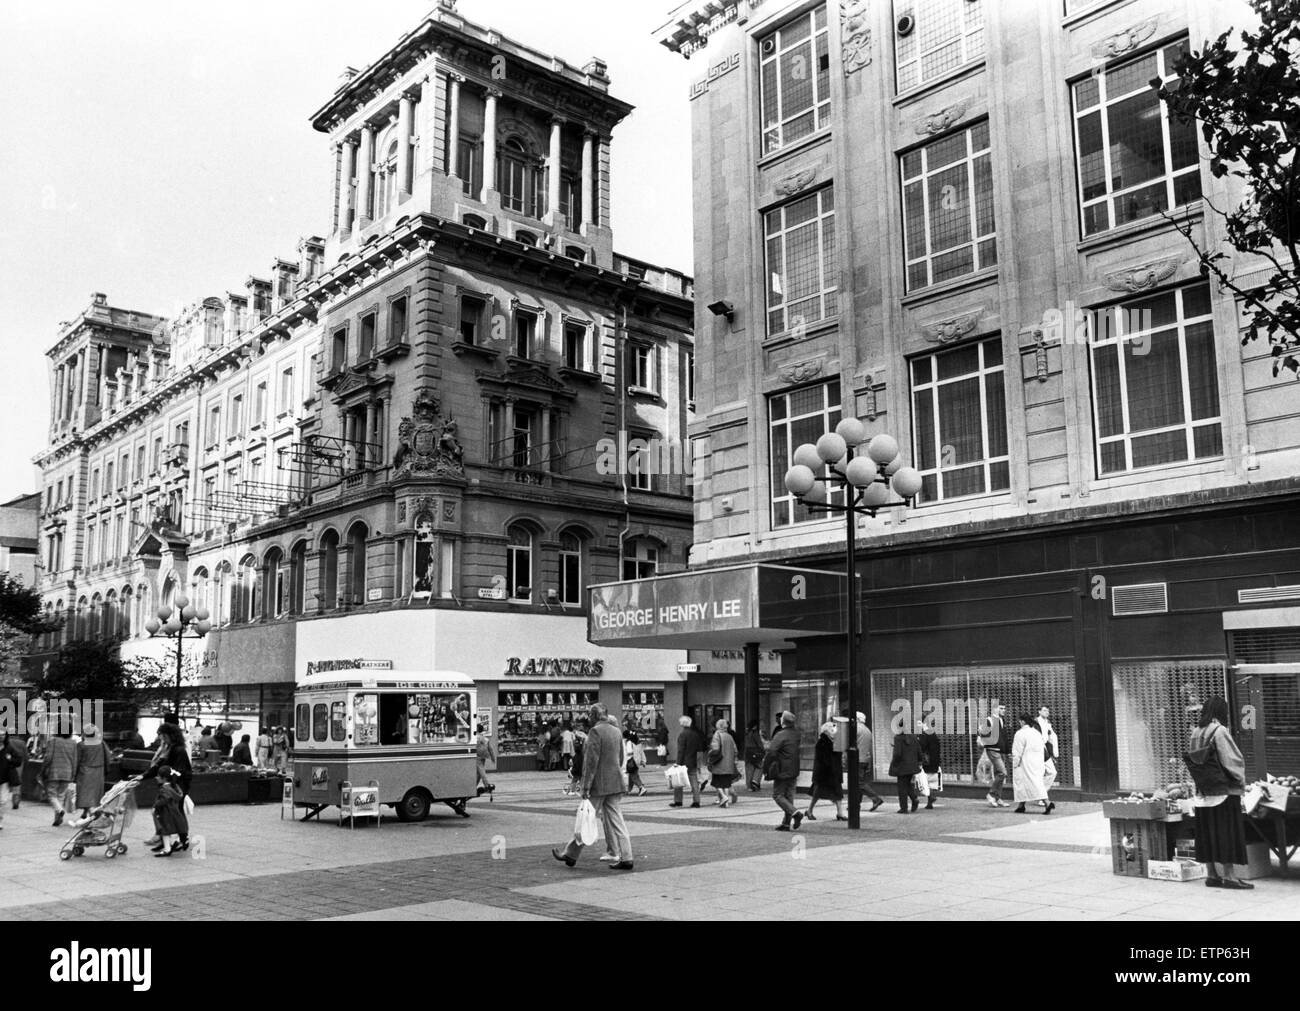 George Henry Lee's building in Church Street. Marks and Spencer is occupying the next block. Church Street is one of Liverpool's shopping areas. Church Street, Liverpool, Merseyside. 30th October 1989. Stock Photo